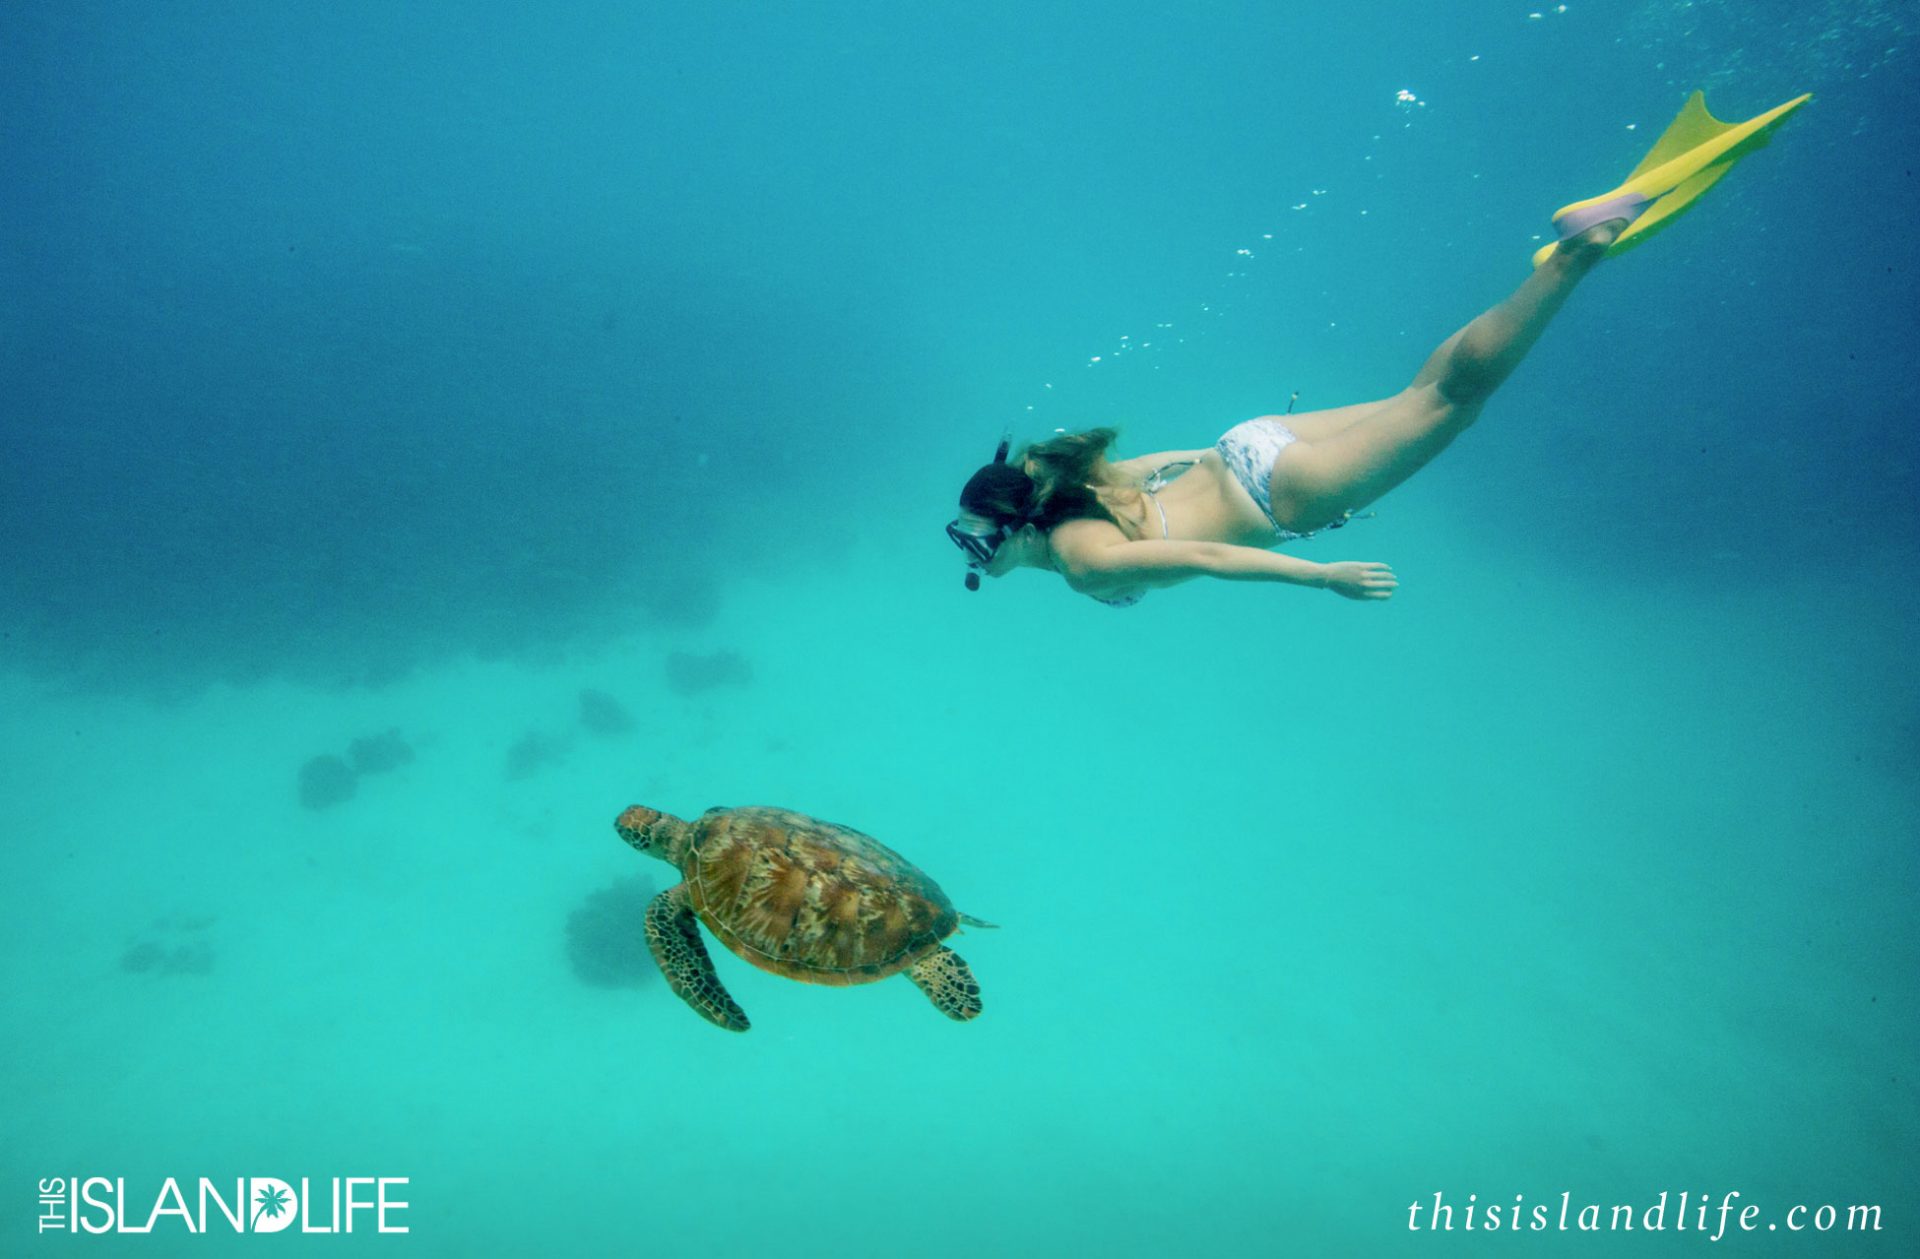 THIS ISLAND LIFE | Southern Great Barrier Reef, Queensland